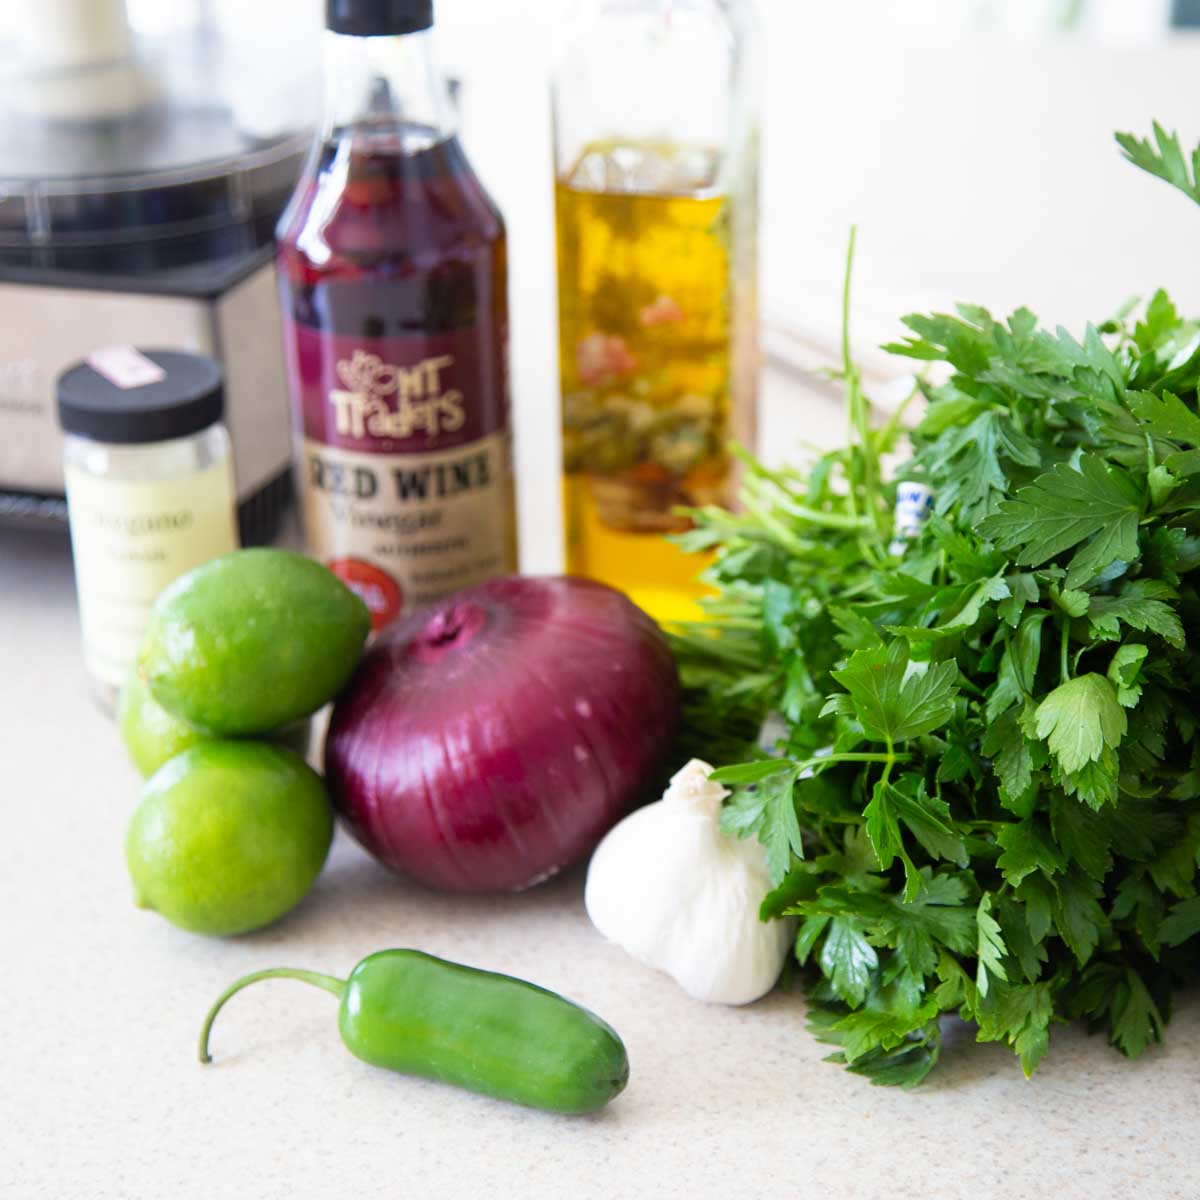 The ingredients to make the chimichurri sauce for the flank steak are on the counter.